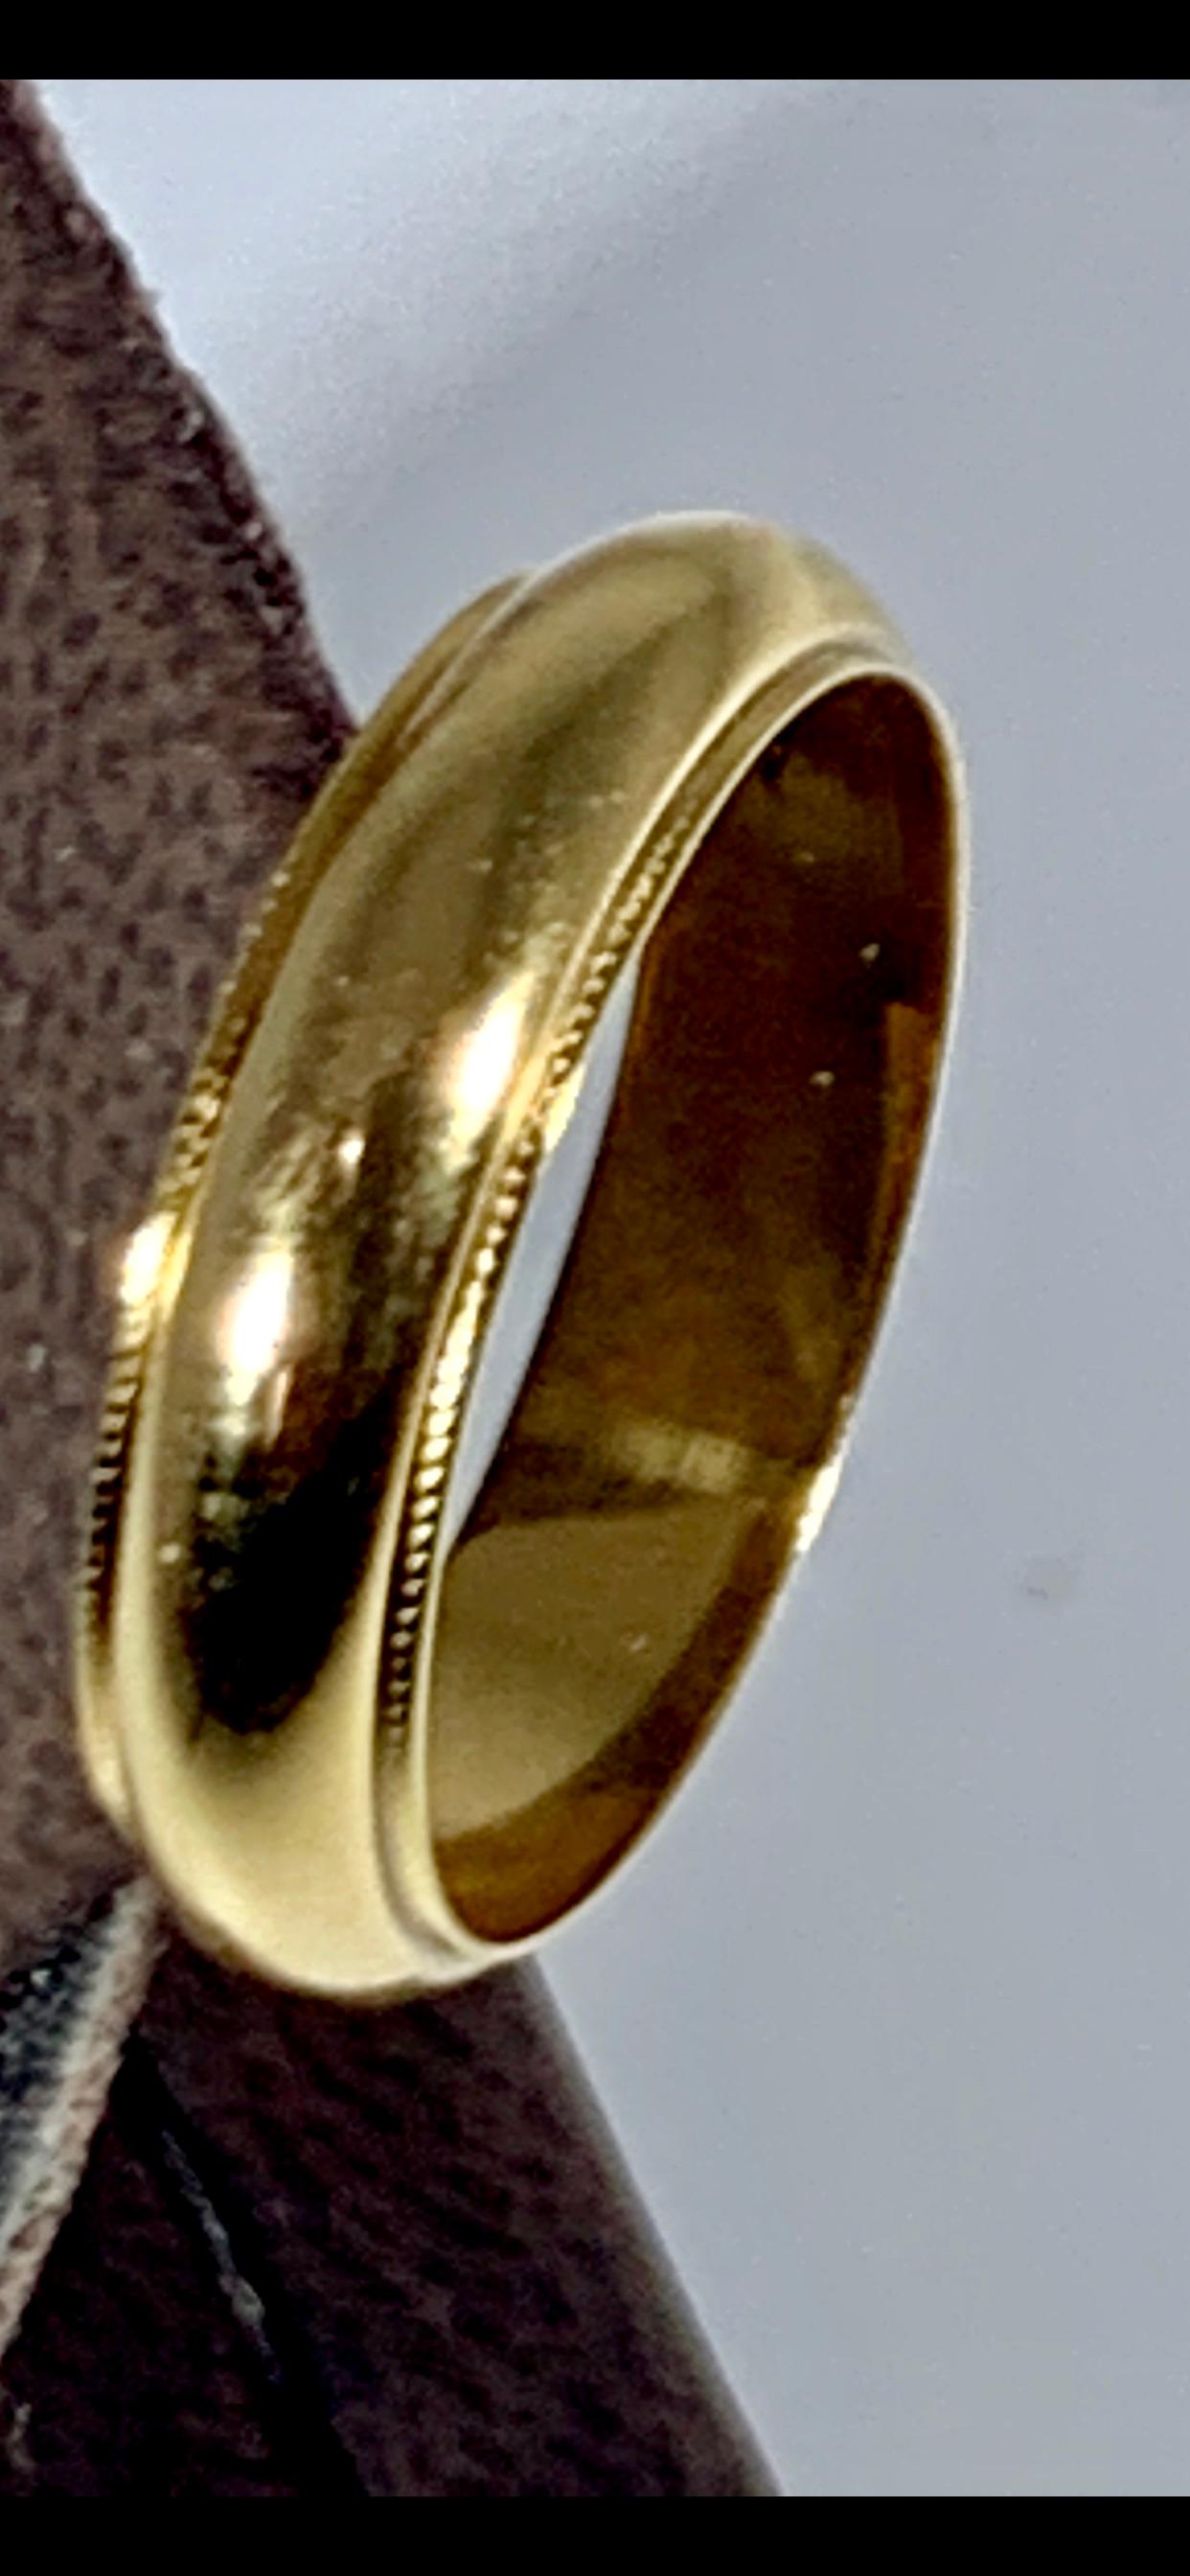 14 Karat Yellow Gold Wide 5.5 mm Plain Wedding Band Ring 6 Grams , Estate
This timeless style adds a step-down edge to each side of the classic domed band. Quality craftsmanship makes this long lasting band a great value. 
Milgrain-Edge Comfort-Fit